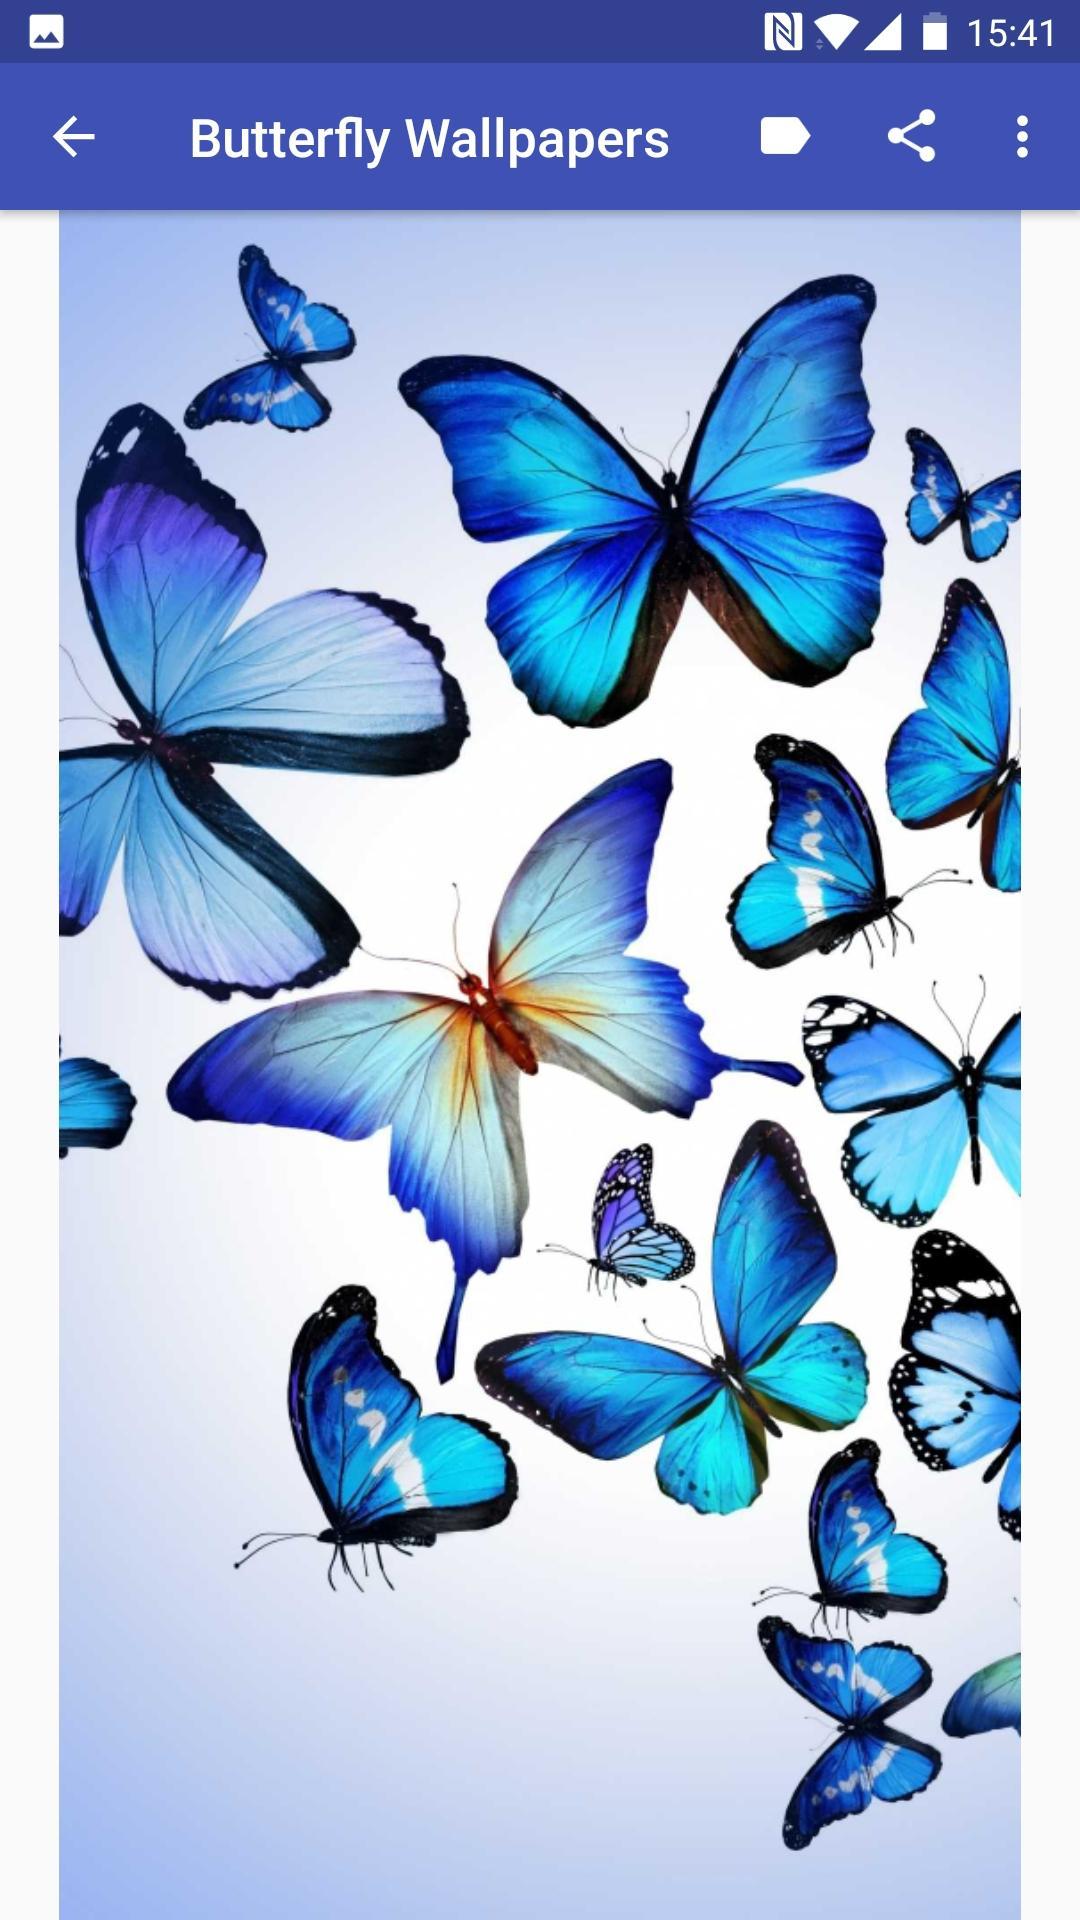 Android 用の Butterfly Wallpapers Apk をダウンロード